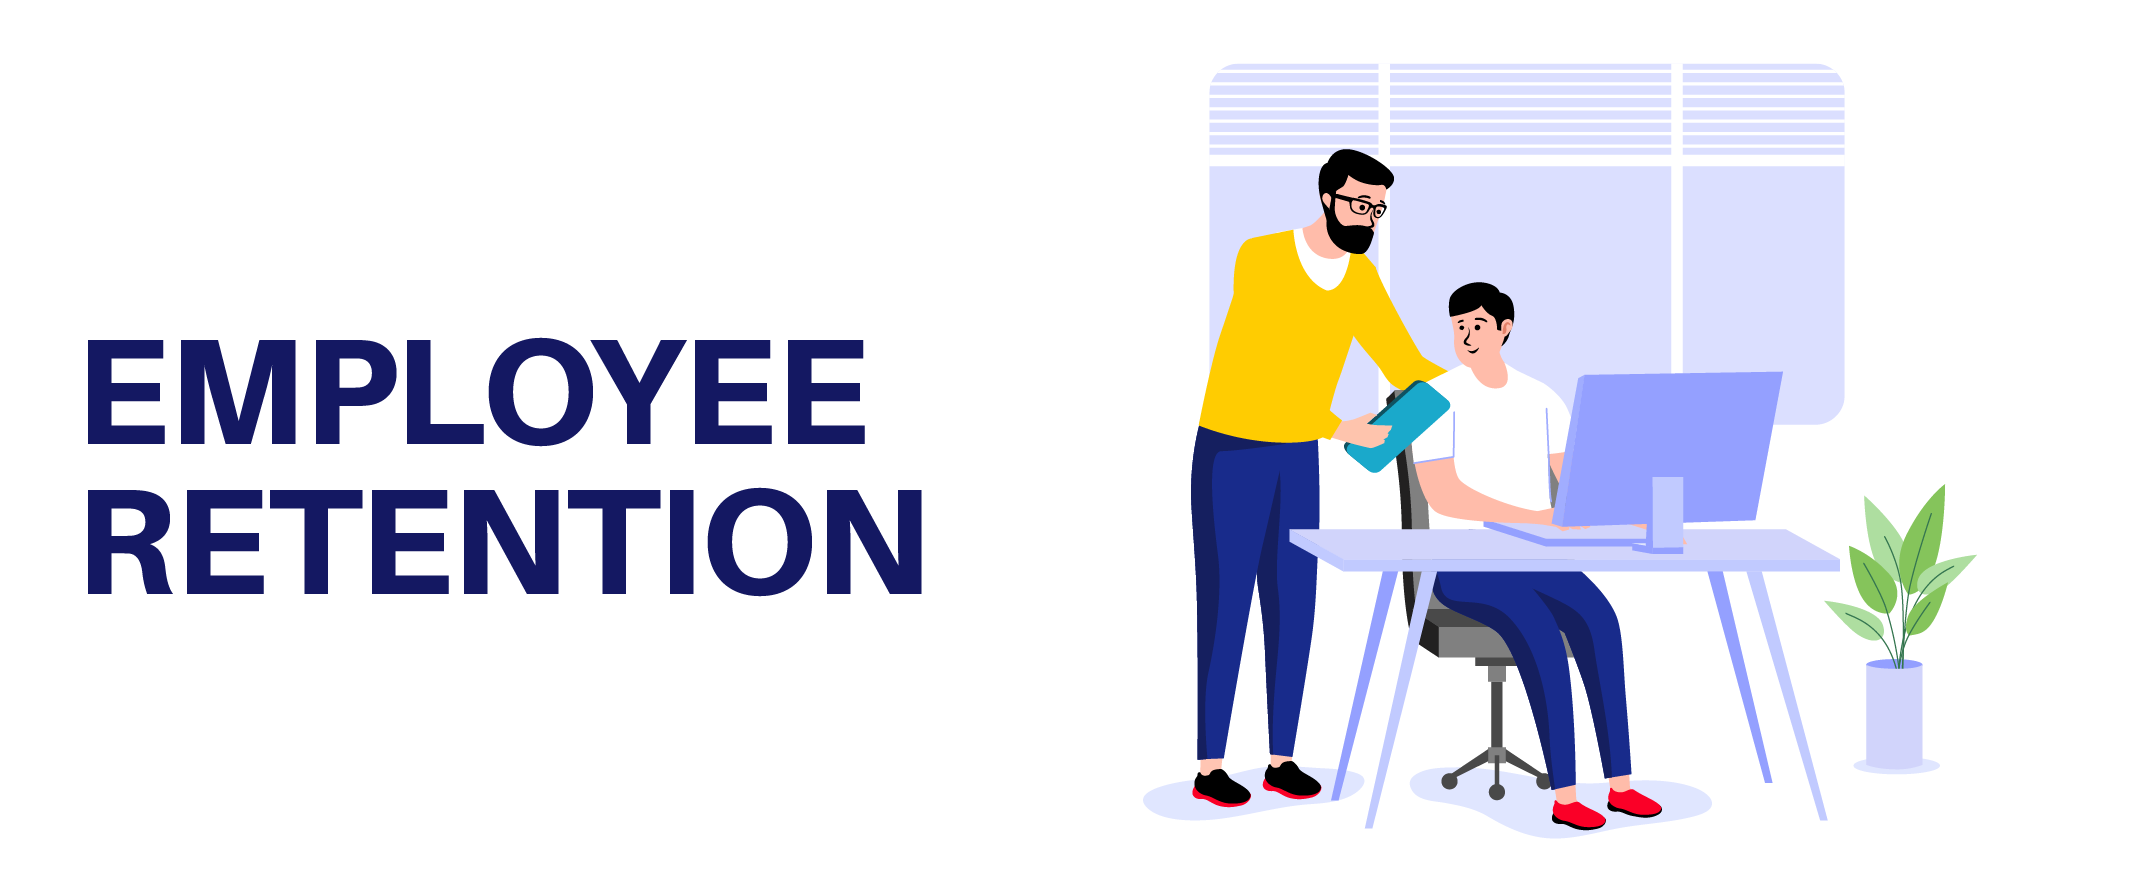 Employee Retention – Definition, Importance, Benefits and Strategies